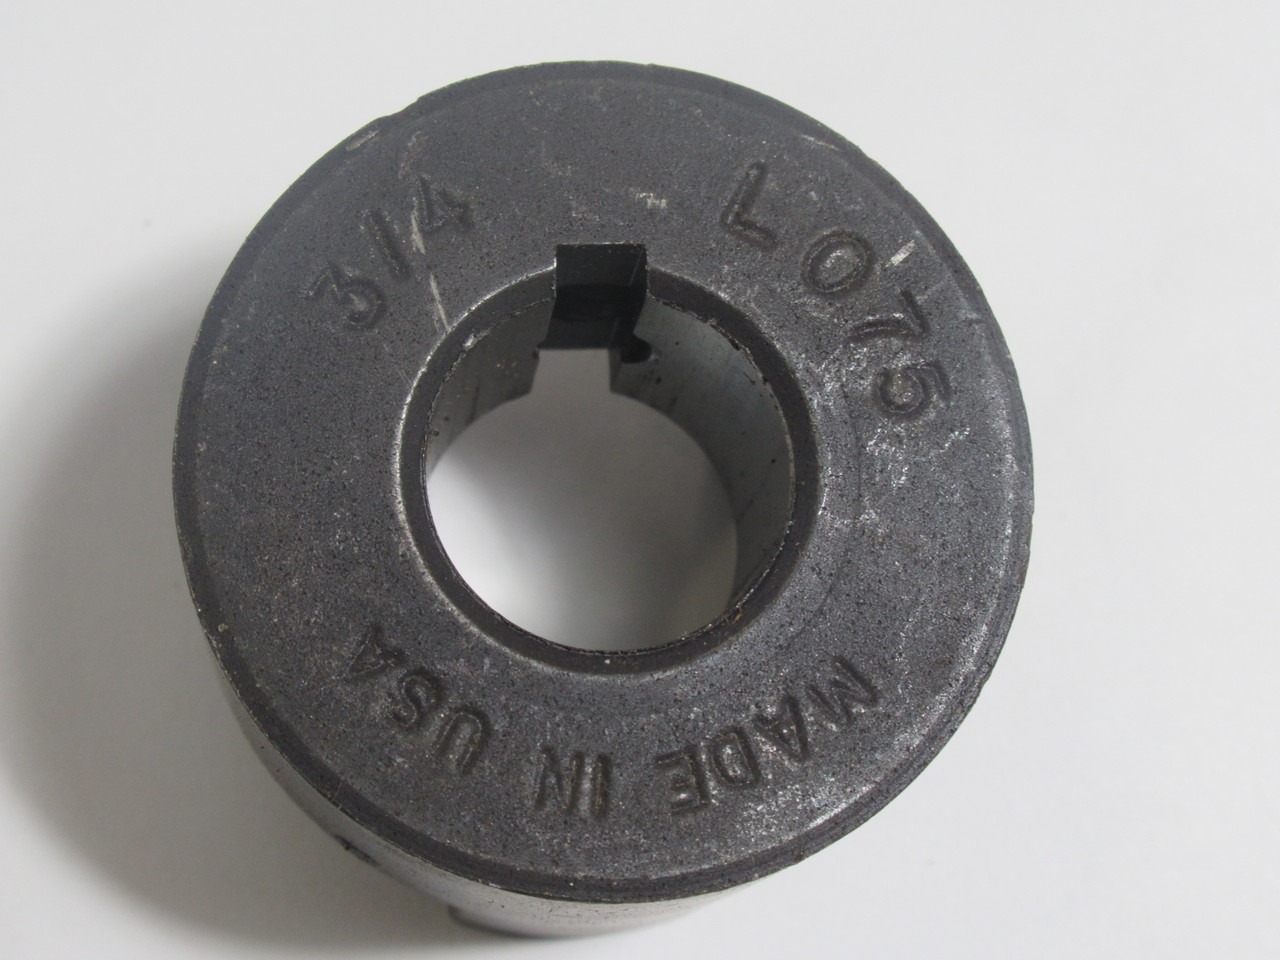 Generic L075 Jaw Coupling 3/4" Bore USED